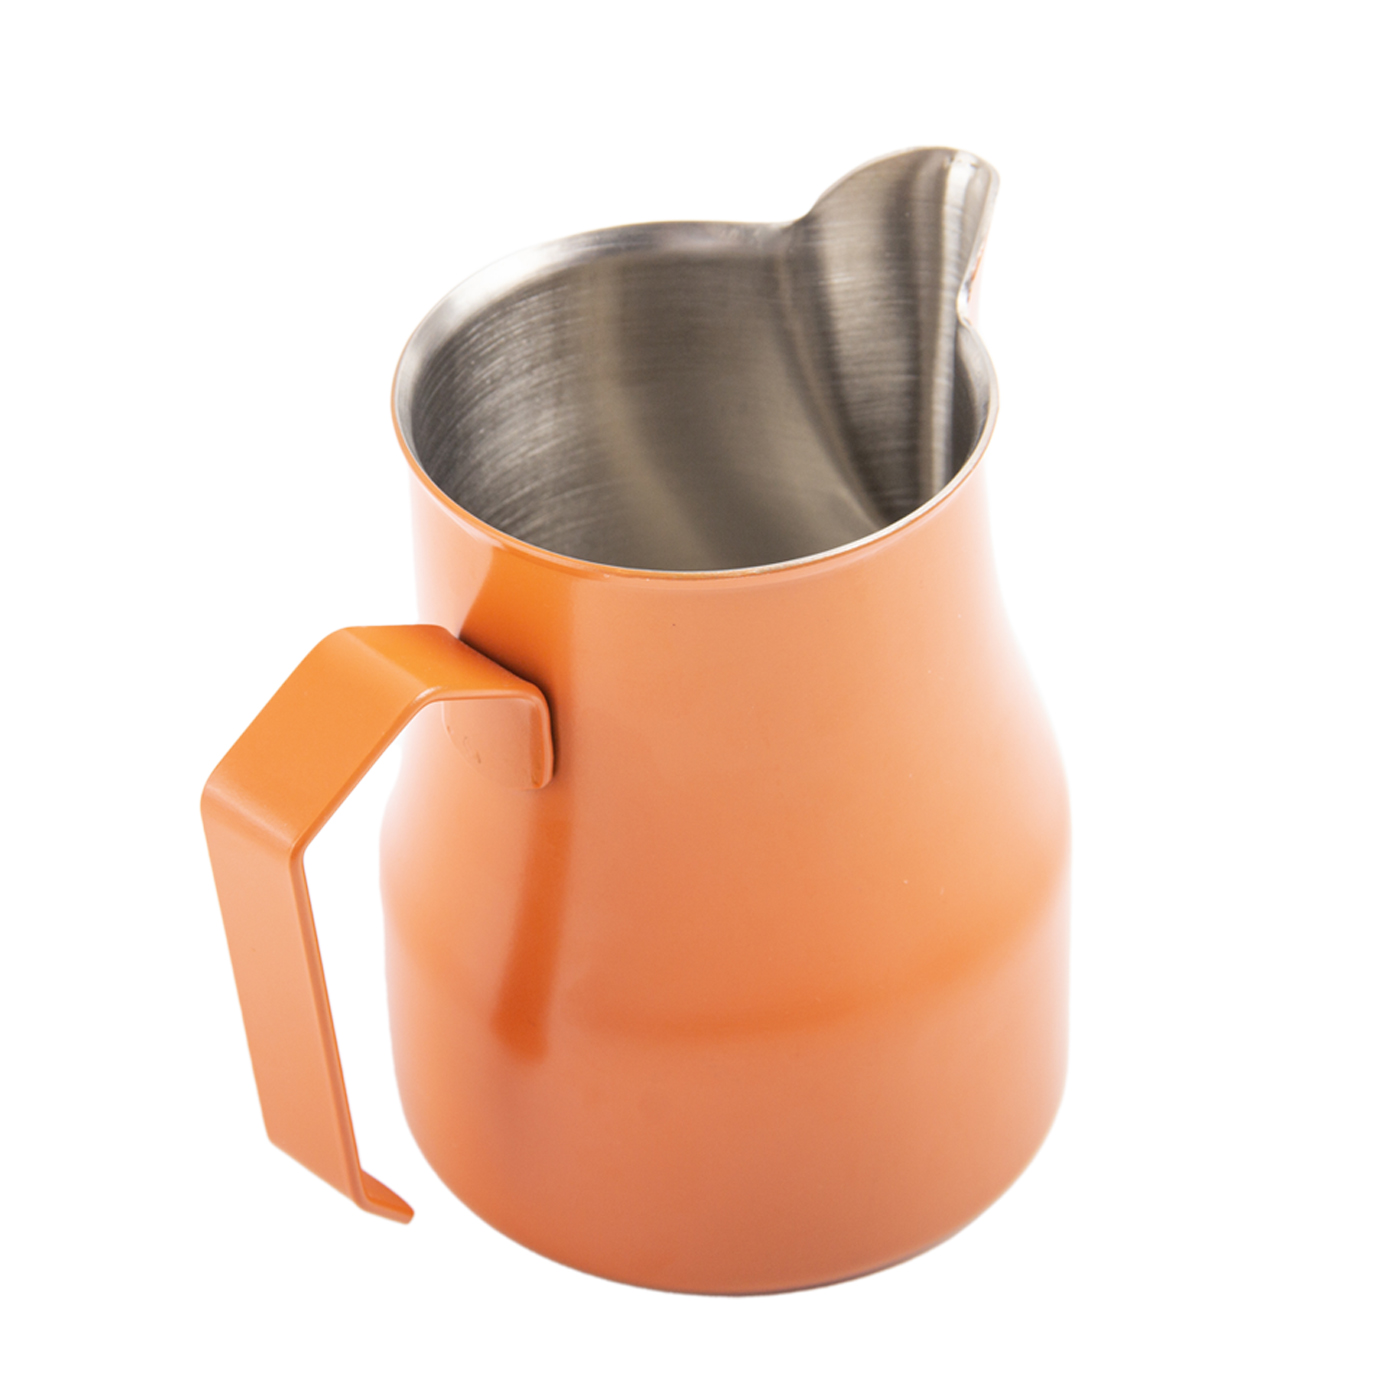 16 oz. Stainless Steel Milk Frothing Pitcher2